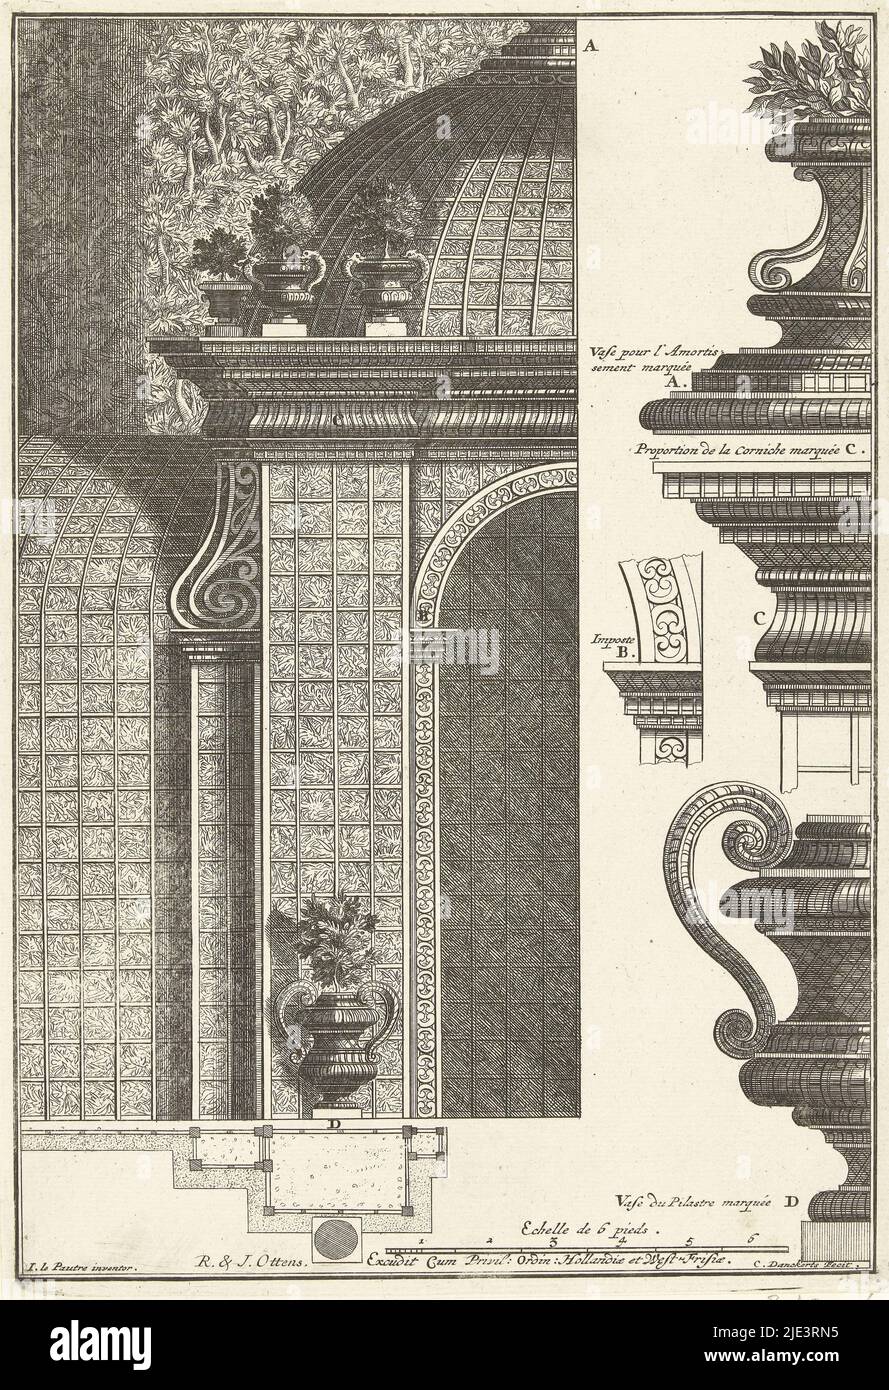 With details of the crown element, two half vases, a cornice and an impost. From series of 6 sheets, later edition than the series with trellis pavilions published by Justus Danckerts. Second imprint, Half trellis pavilion and details Trellis pavilions (series title), print maker: Cornelis Danckerts (II), (mentioned on object), Pierre Lepautre, (mentioned on object), publisher: Reinier Ottens (I), 1726 - 1750 and/or 1750 - 1765, paper, etching, h 281 mm × w 194 mm Stock Photo